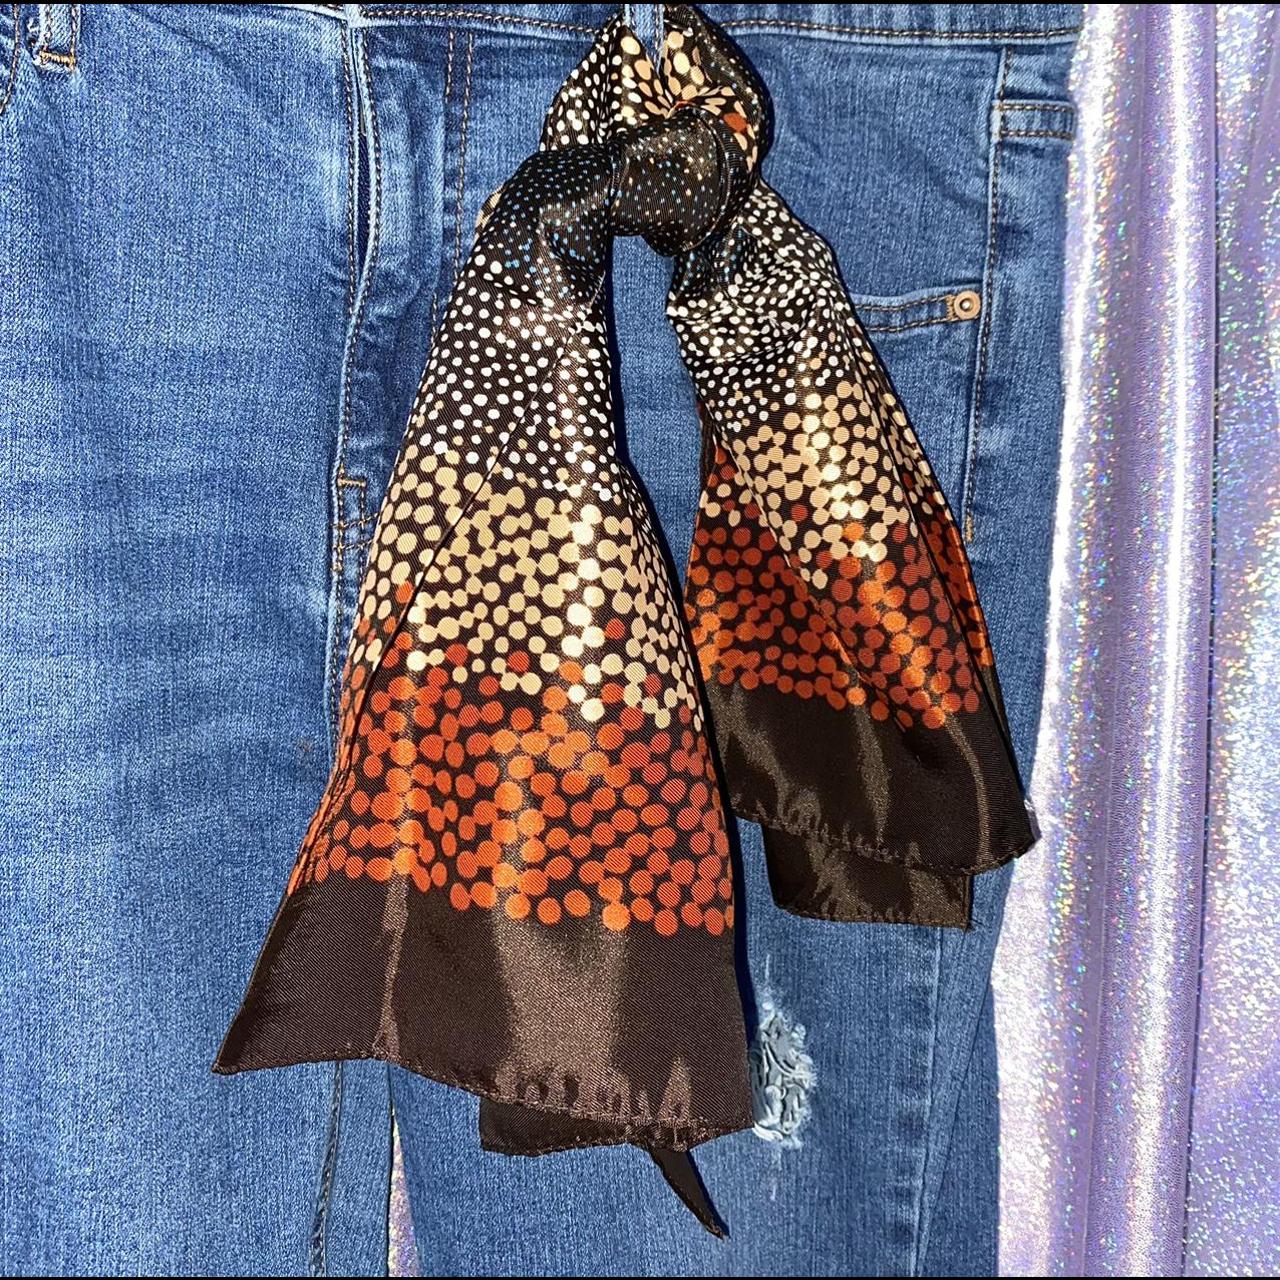 Product Image 2 - Vintage Jason Maxwell scarf🤎

• Material: